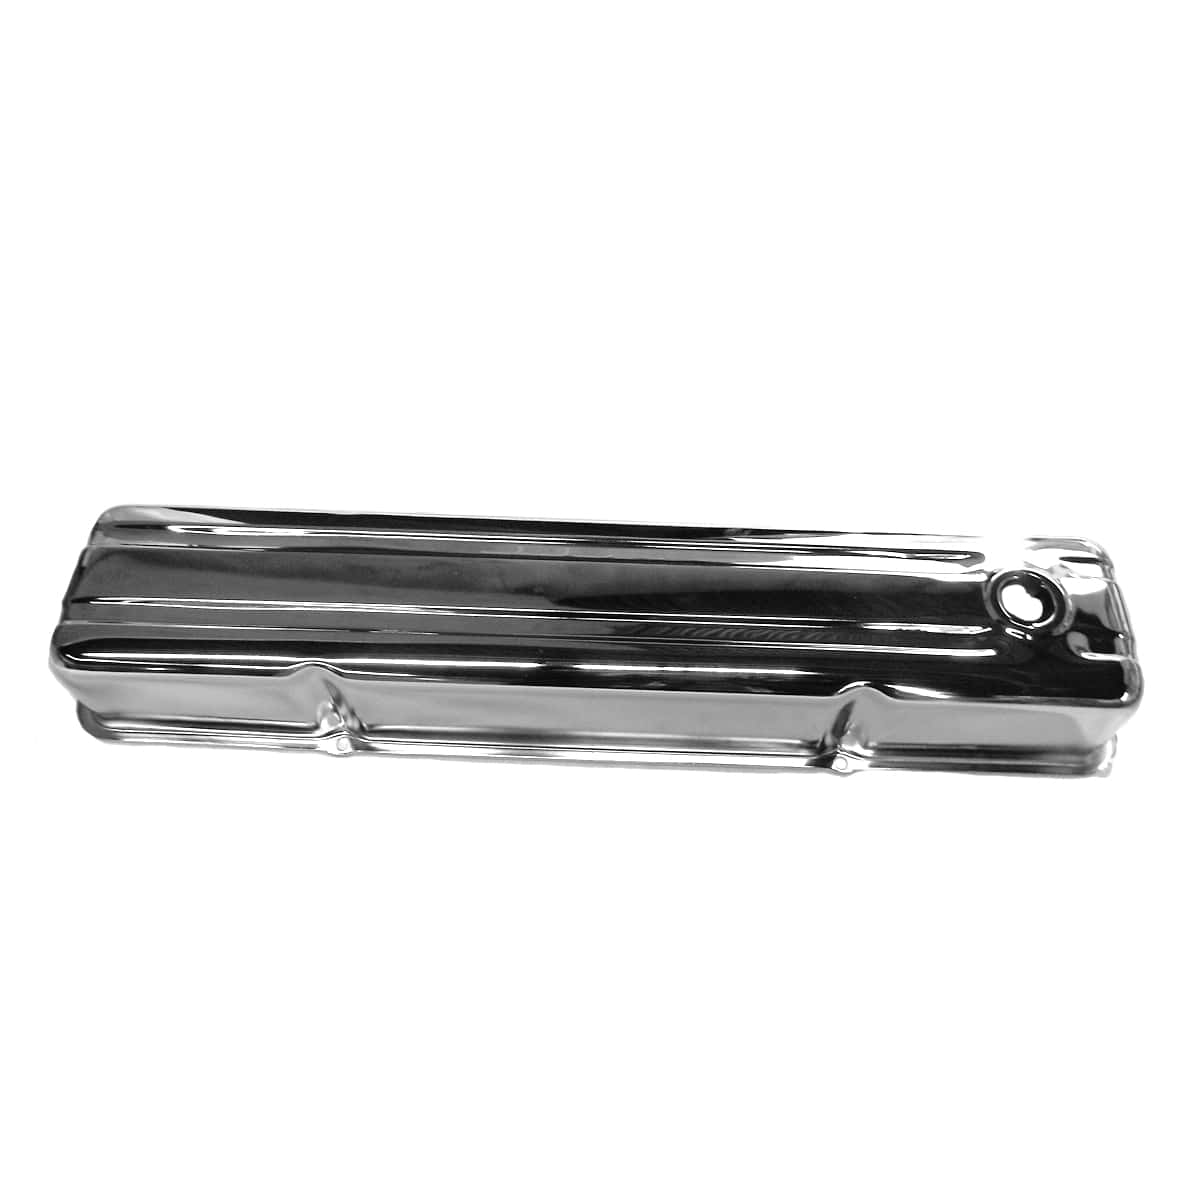 1954-1962 Valve Cover Chrome 235 3 7/8 Tall Chevrolet and GMC Pickup Truck